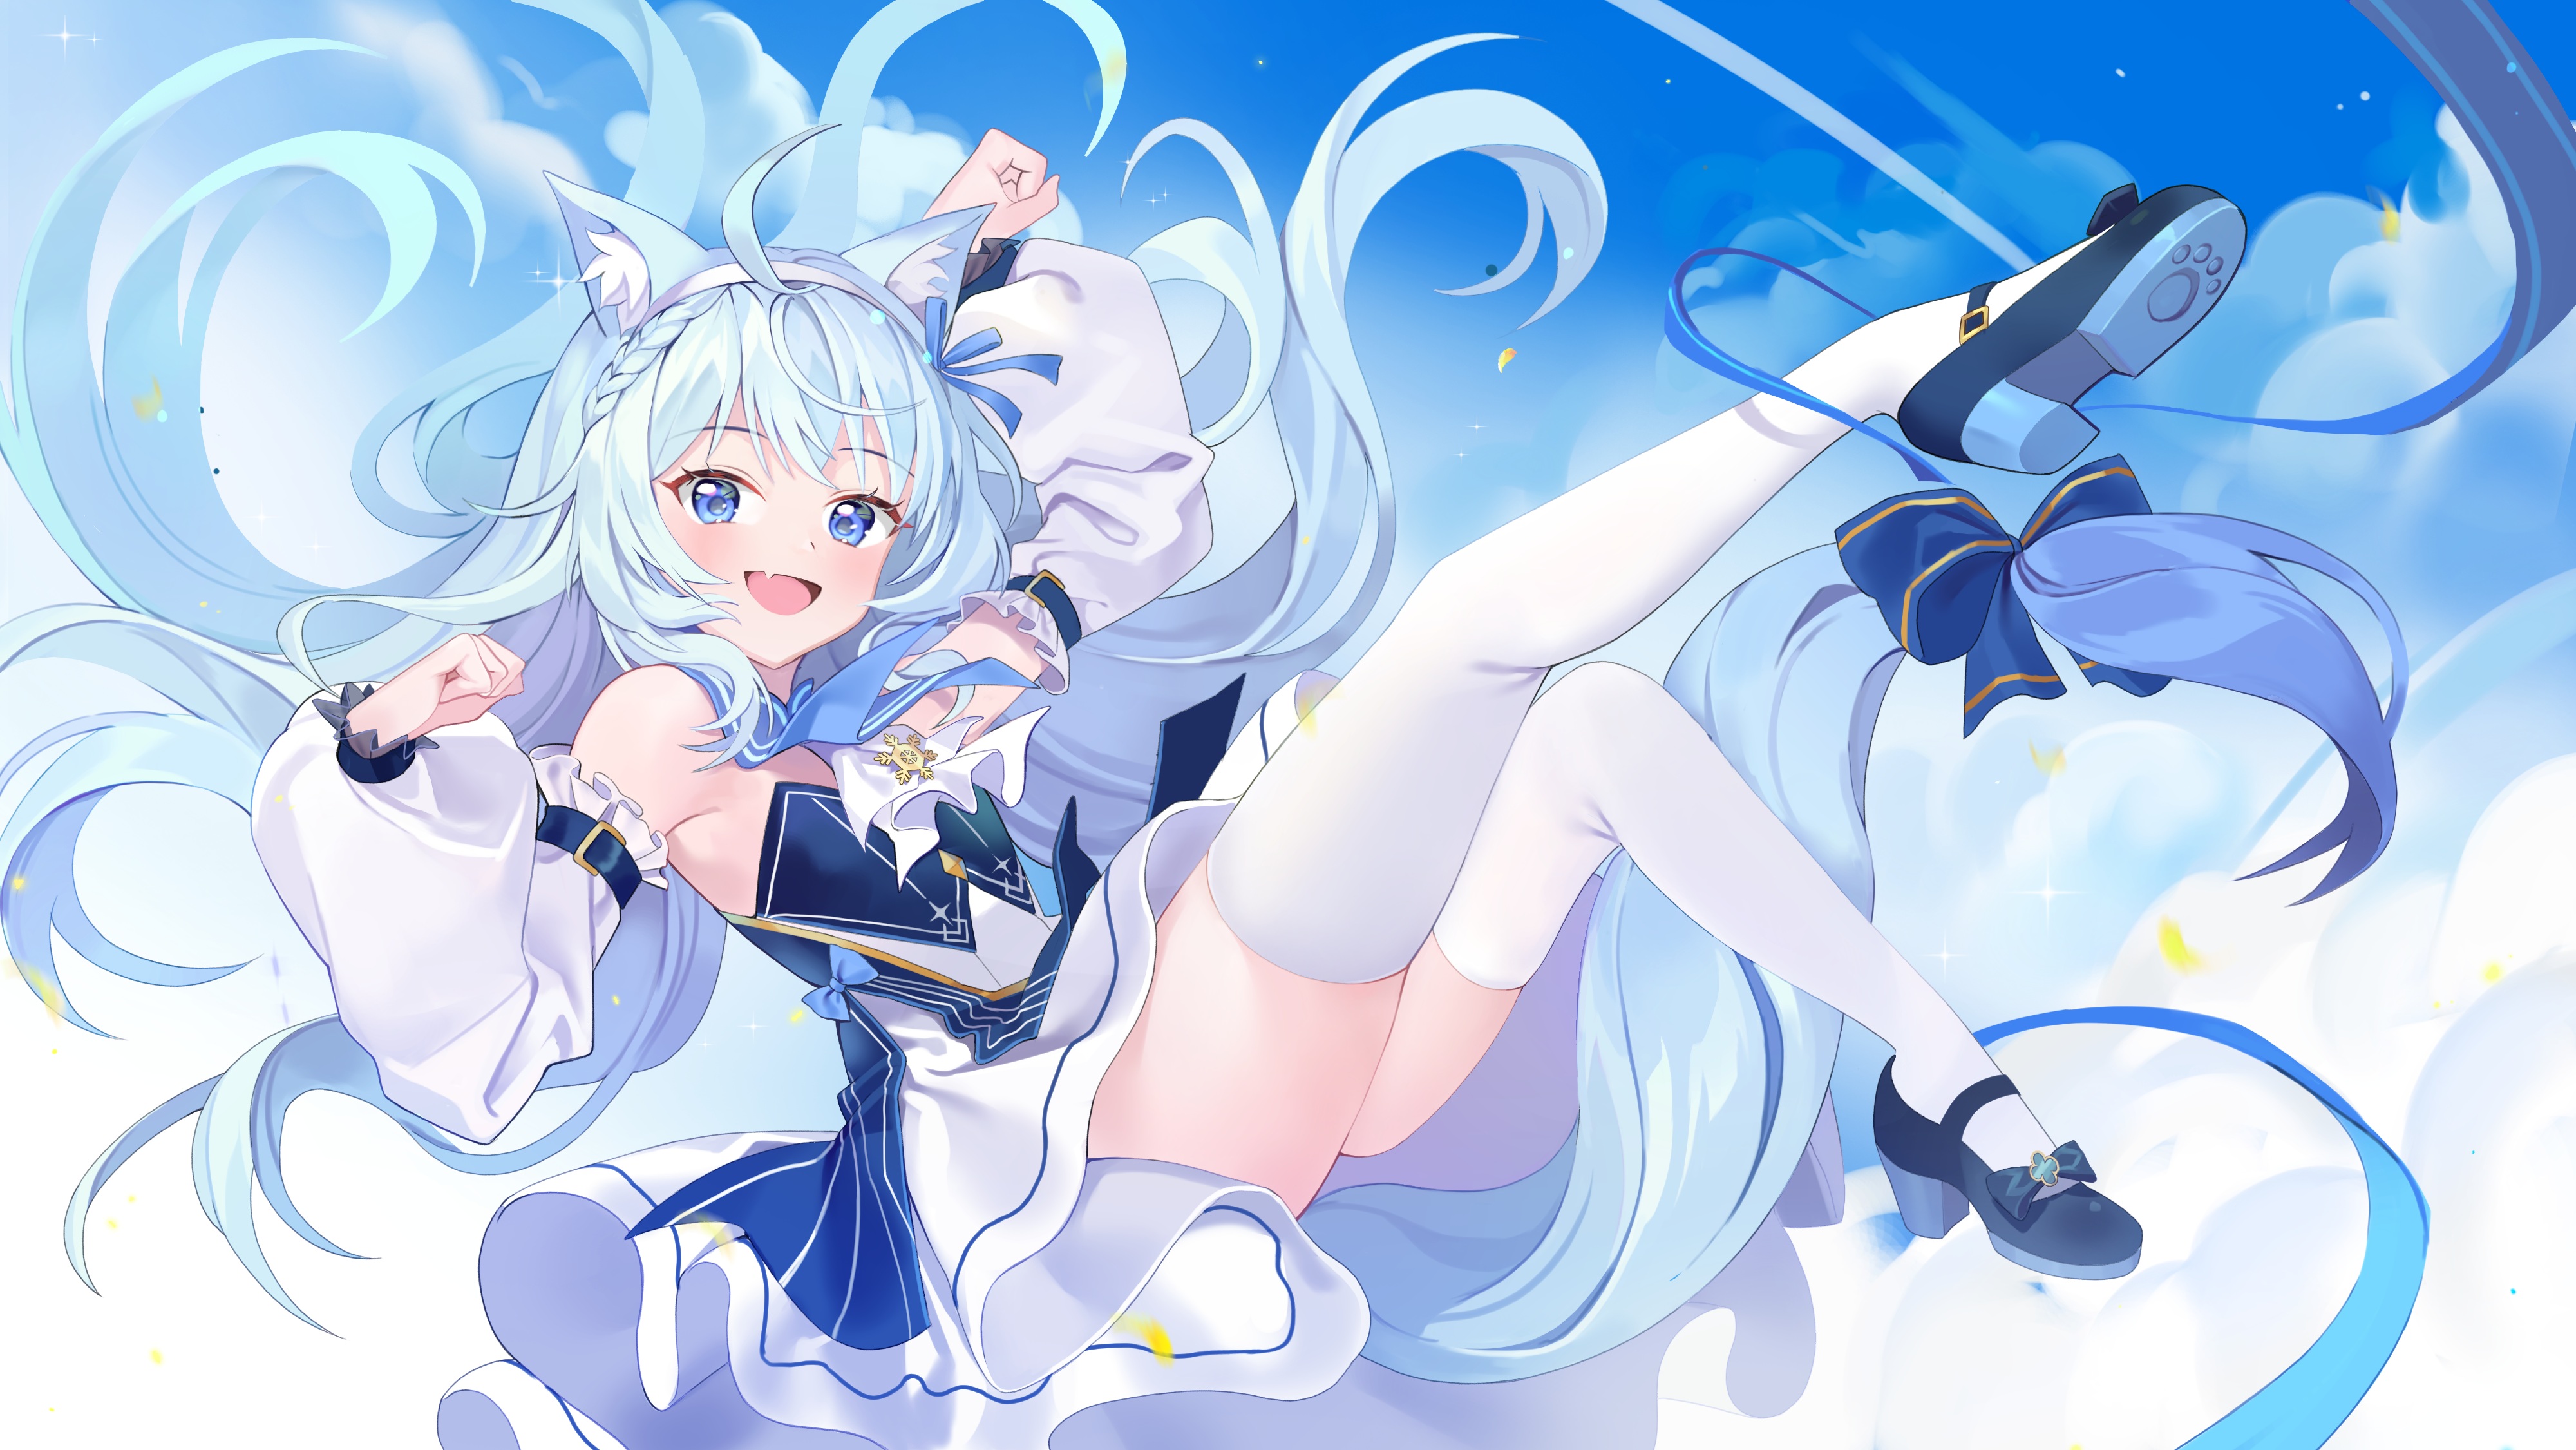 Anime 4000x2251 anime anime girls blue hair blue eyes stockings cat girl cat ears braids looking at viewer long hair bow tie clouds sky thighs smiling open mouth dress